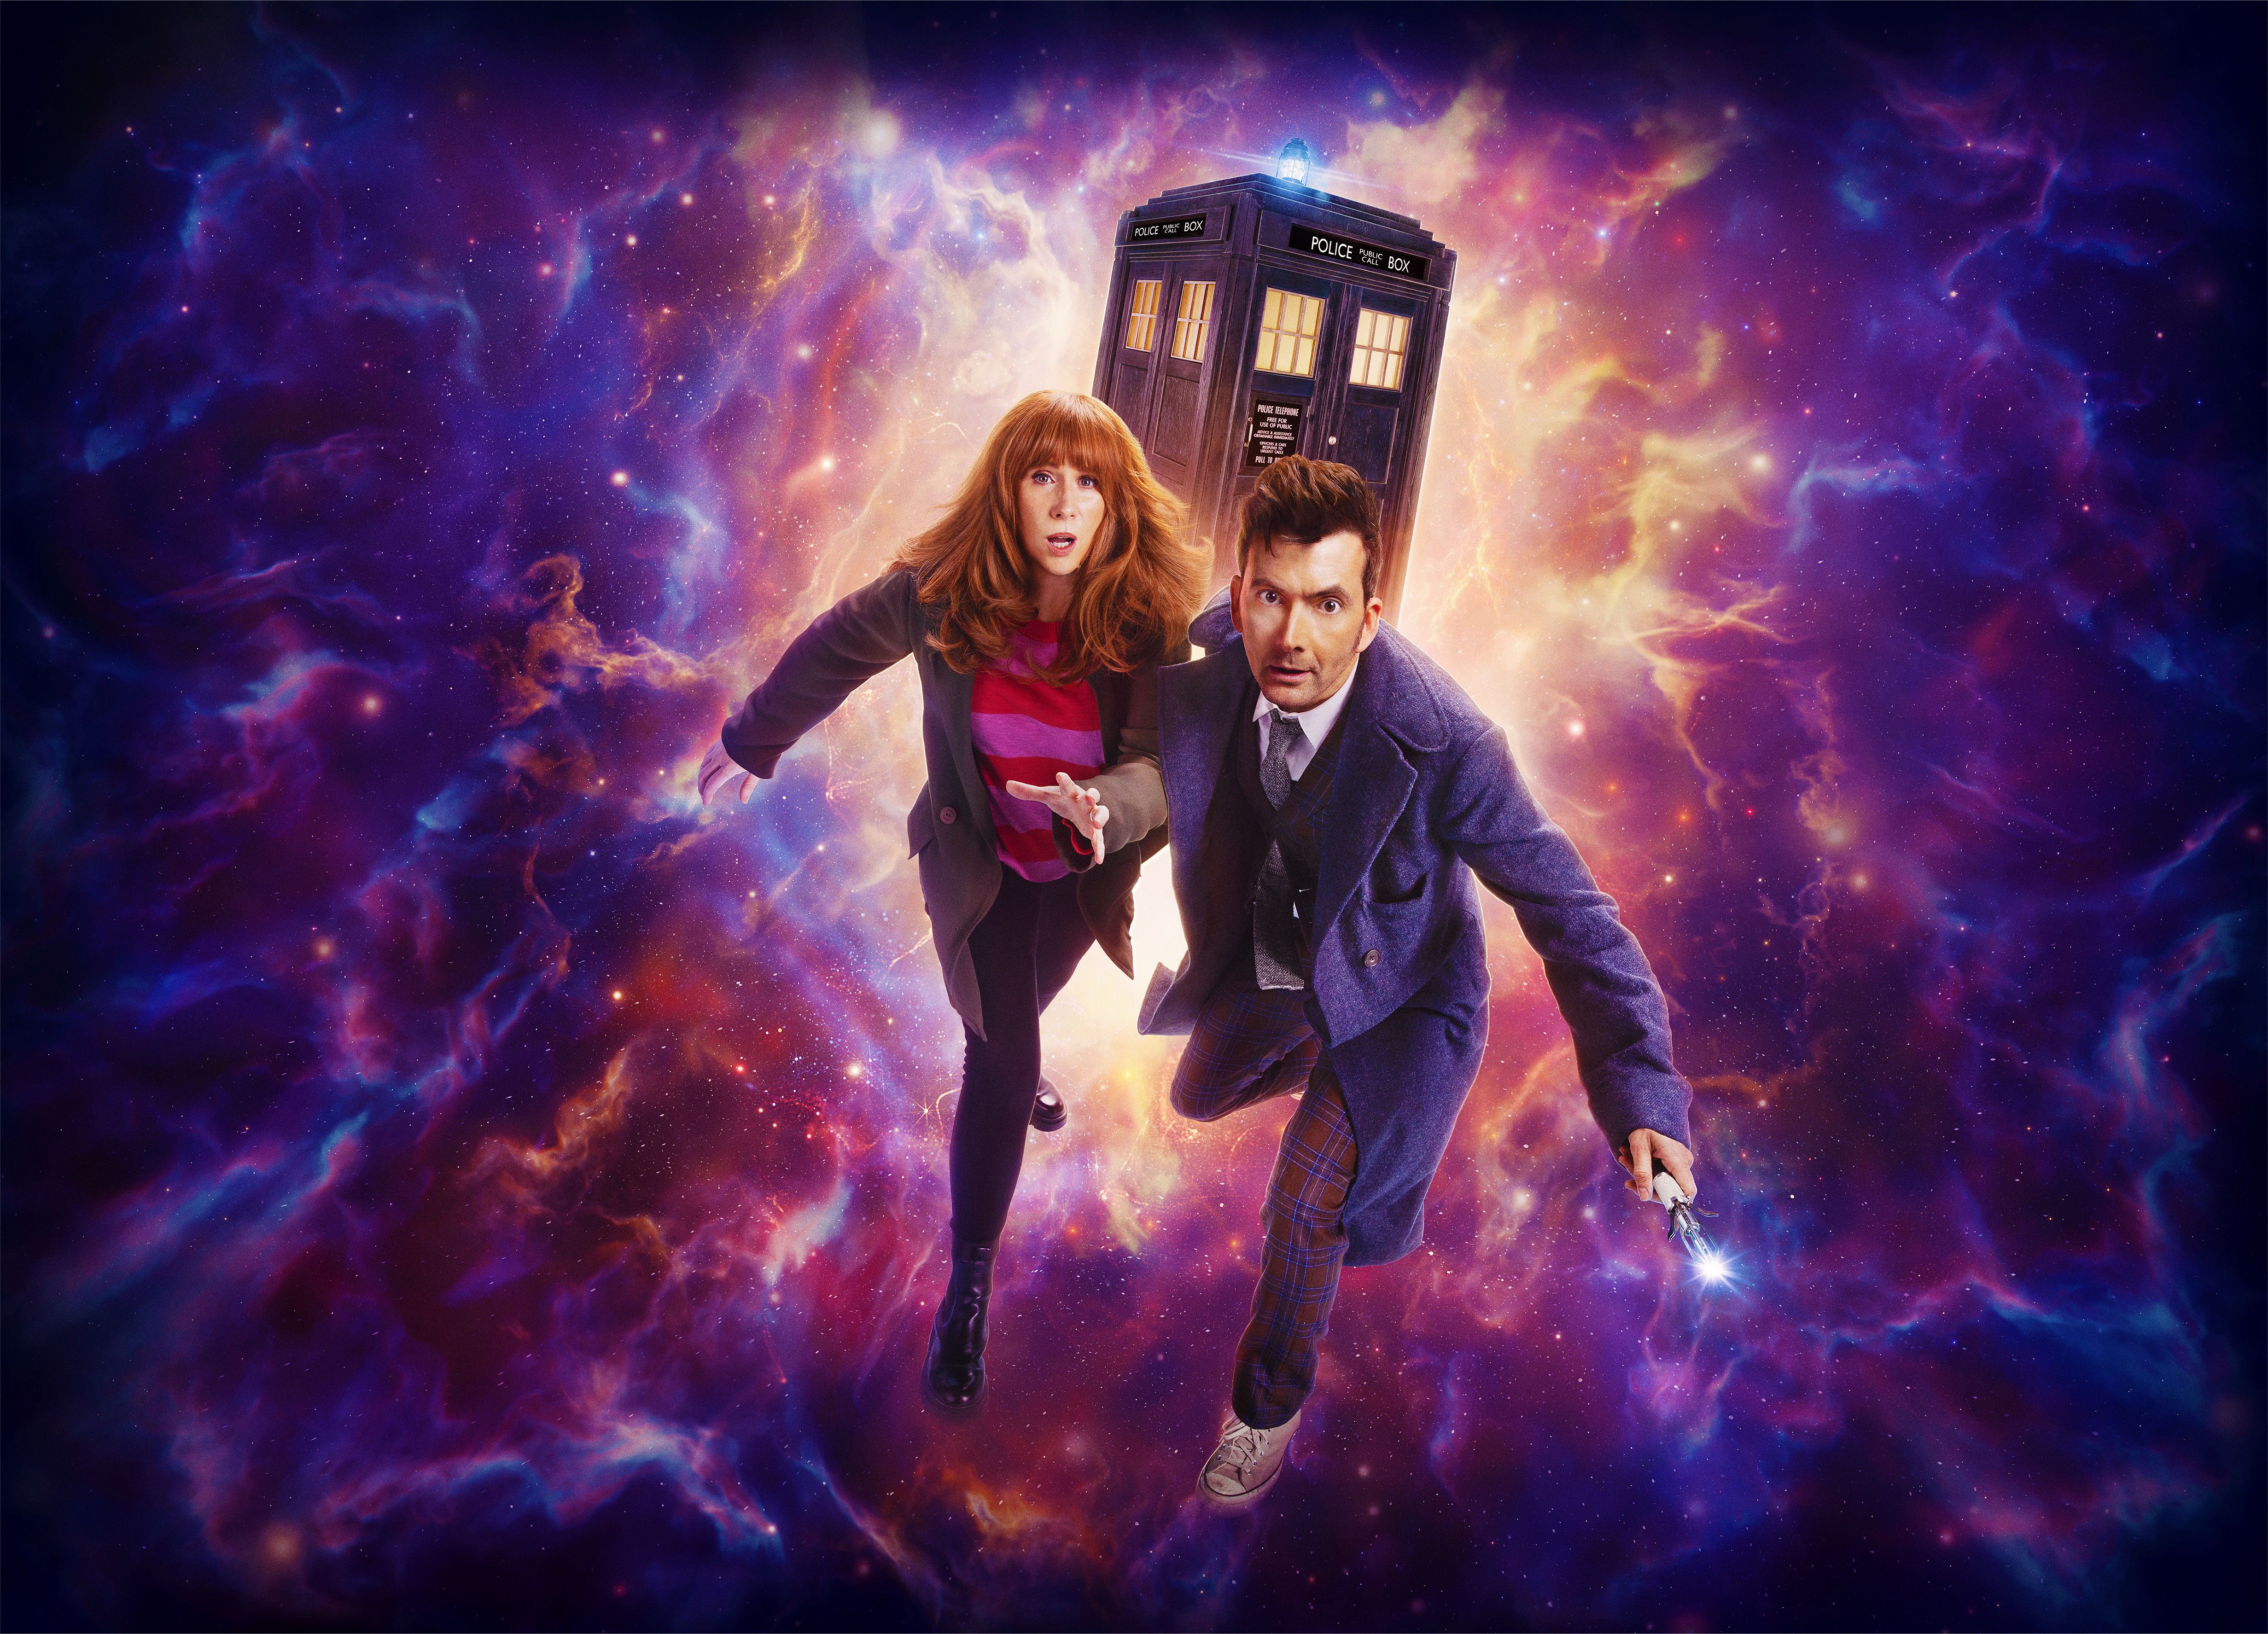 David Tennant as the Doctor and Catherine Tate as Donna Noble emerging from the TARDIS surrounded by a pink and blue nebula in the Doctor Who 60th anniversary special.